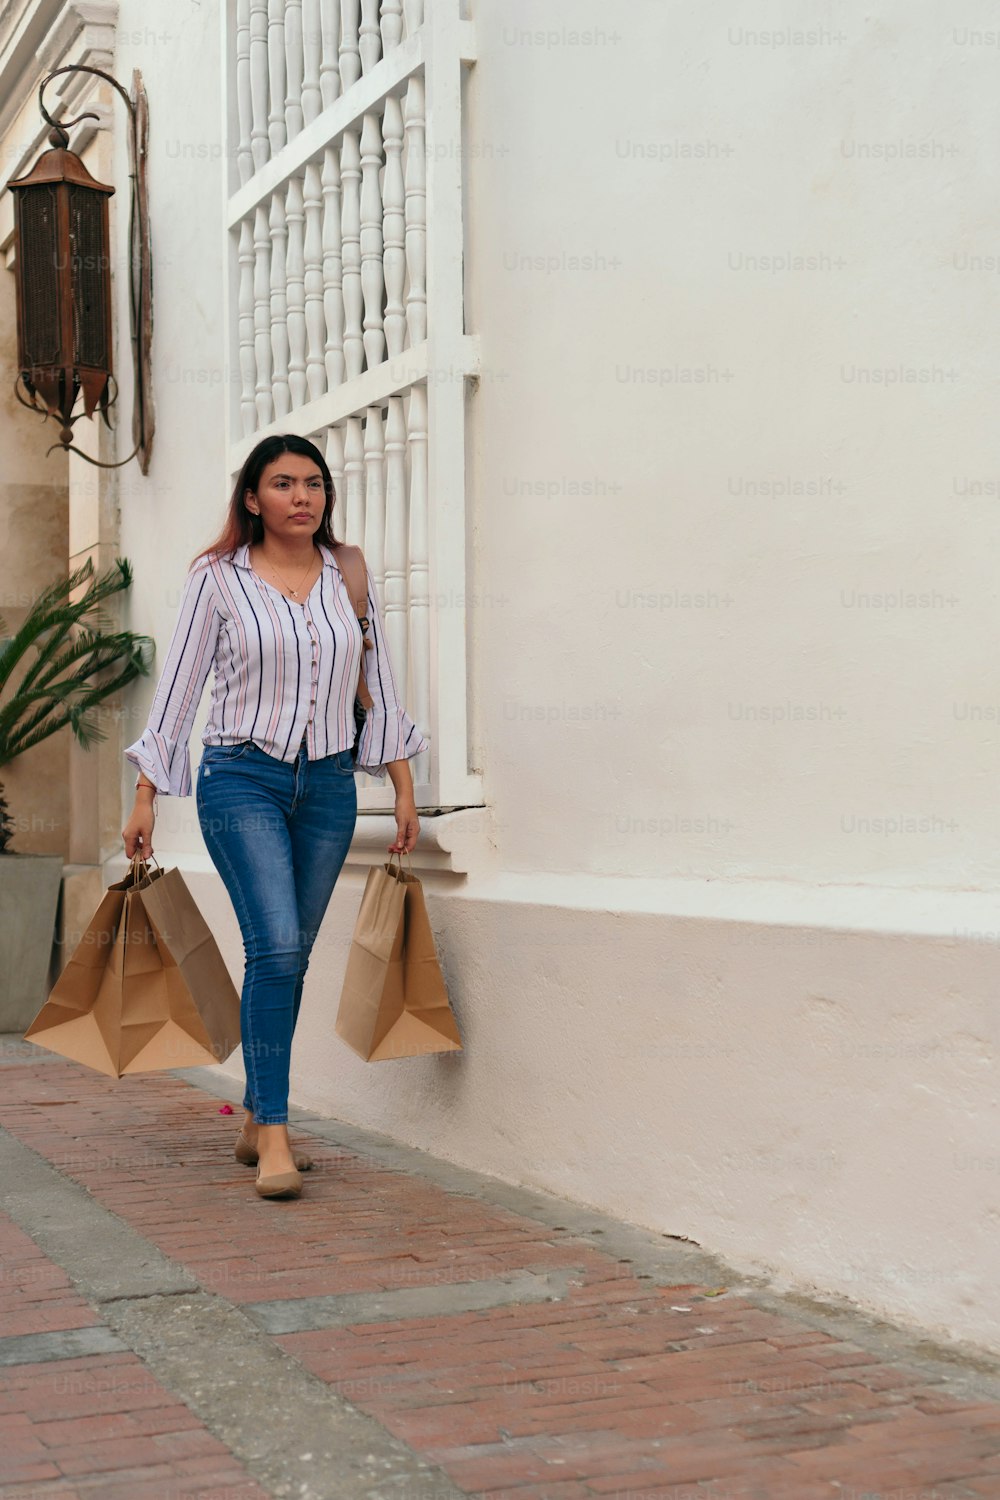 Latin Woman carrying a bag while walking through the city